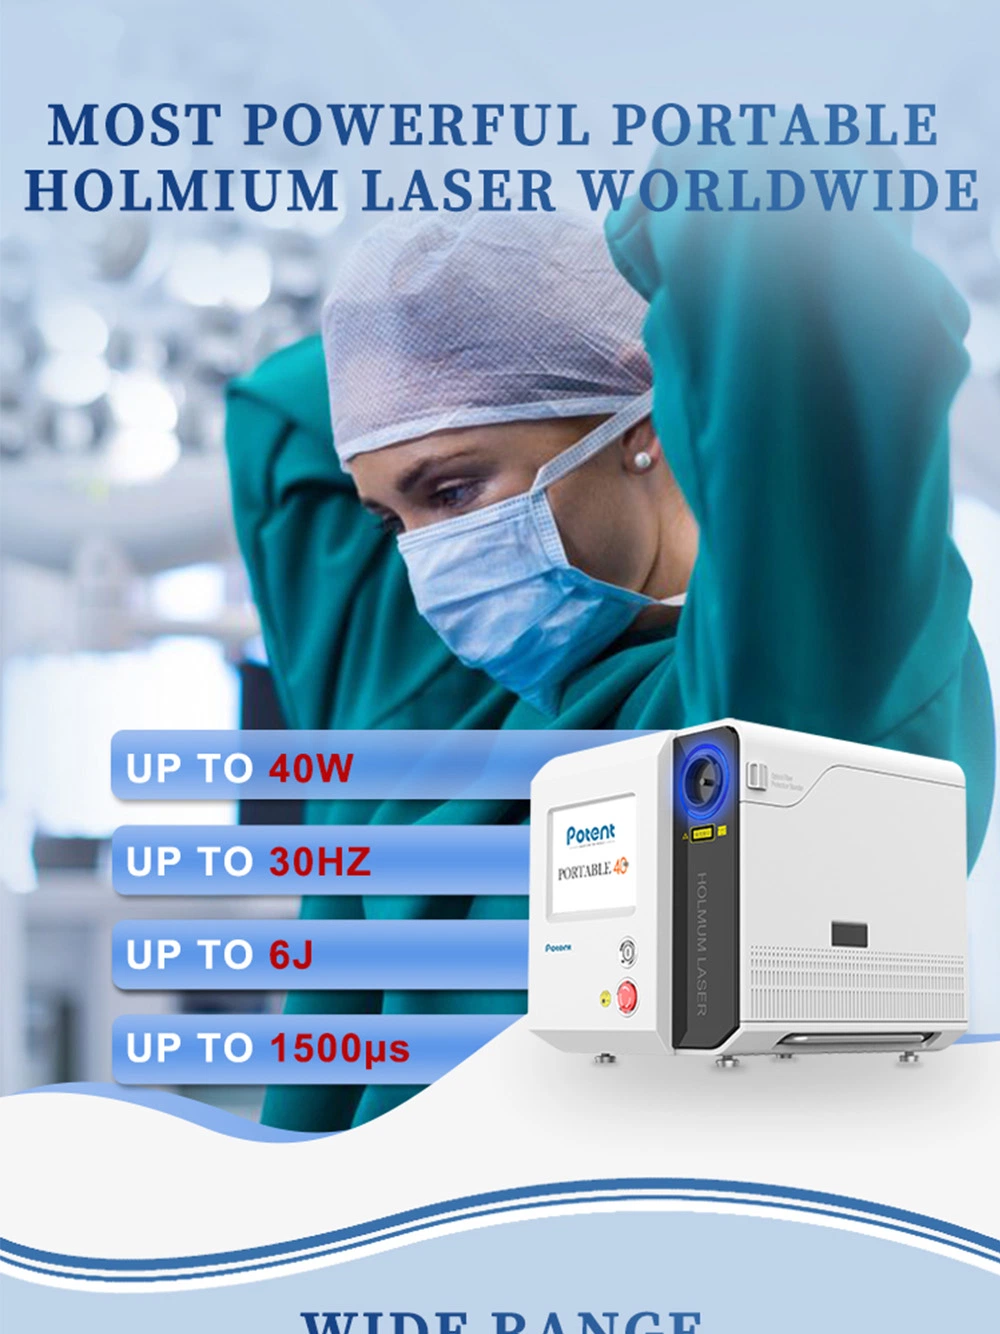 Potent Manufacturer Resectoscope Urology Lithotripsy Machine Kidney Stones Holmium Laser Greenlight Prostate Biopsy Needle Guide